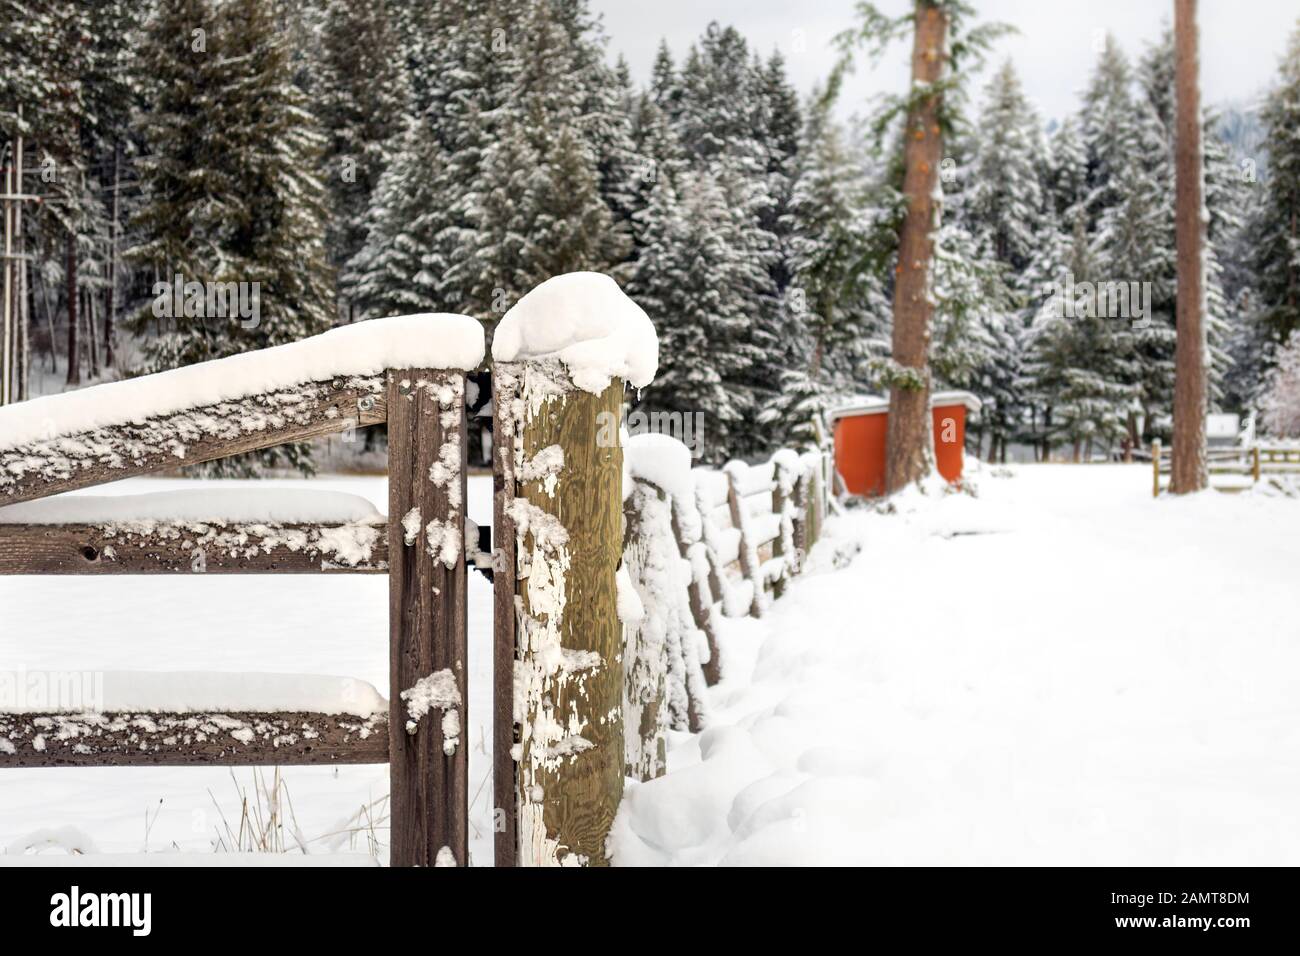 A wooden fence post covered in snow during winter in the rural mountains of North Idaho, USA Stock Photo